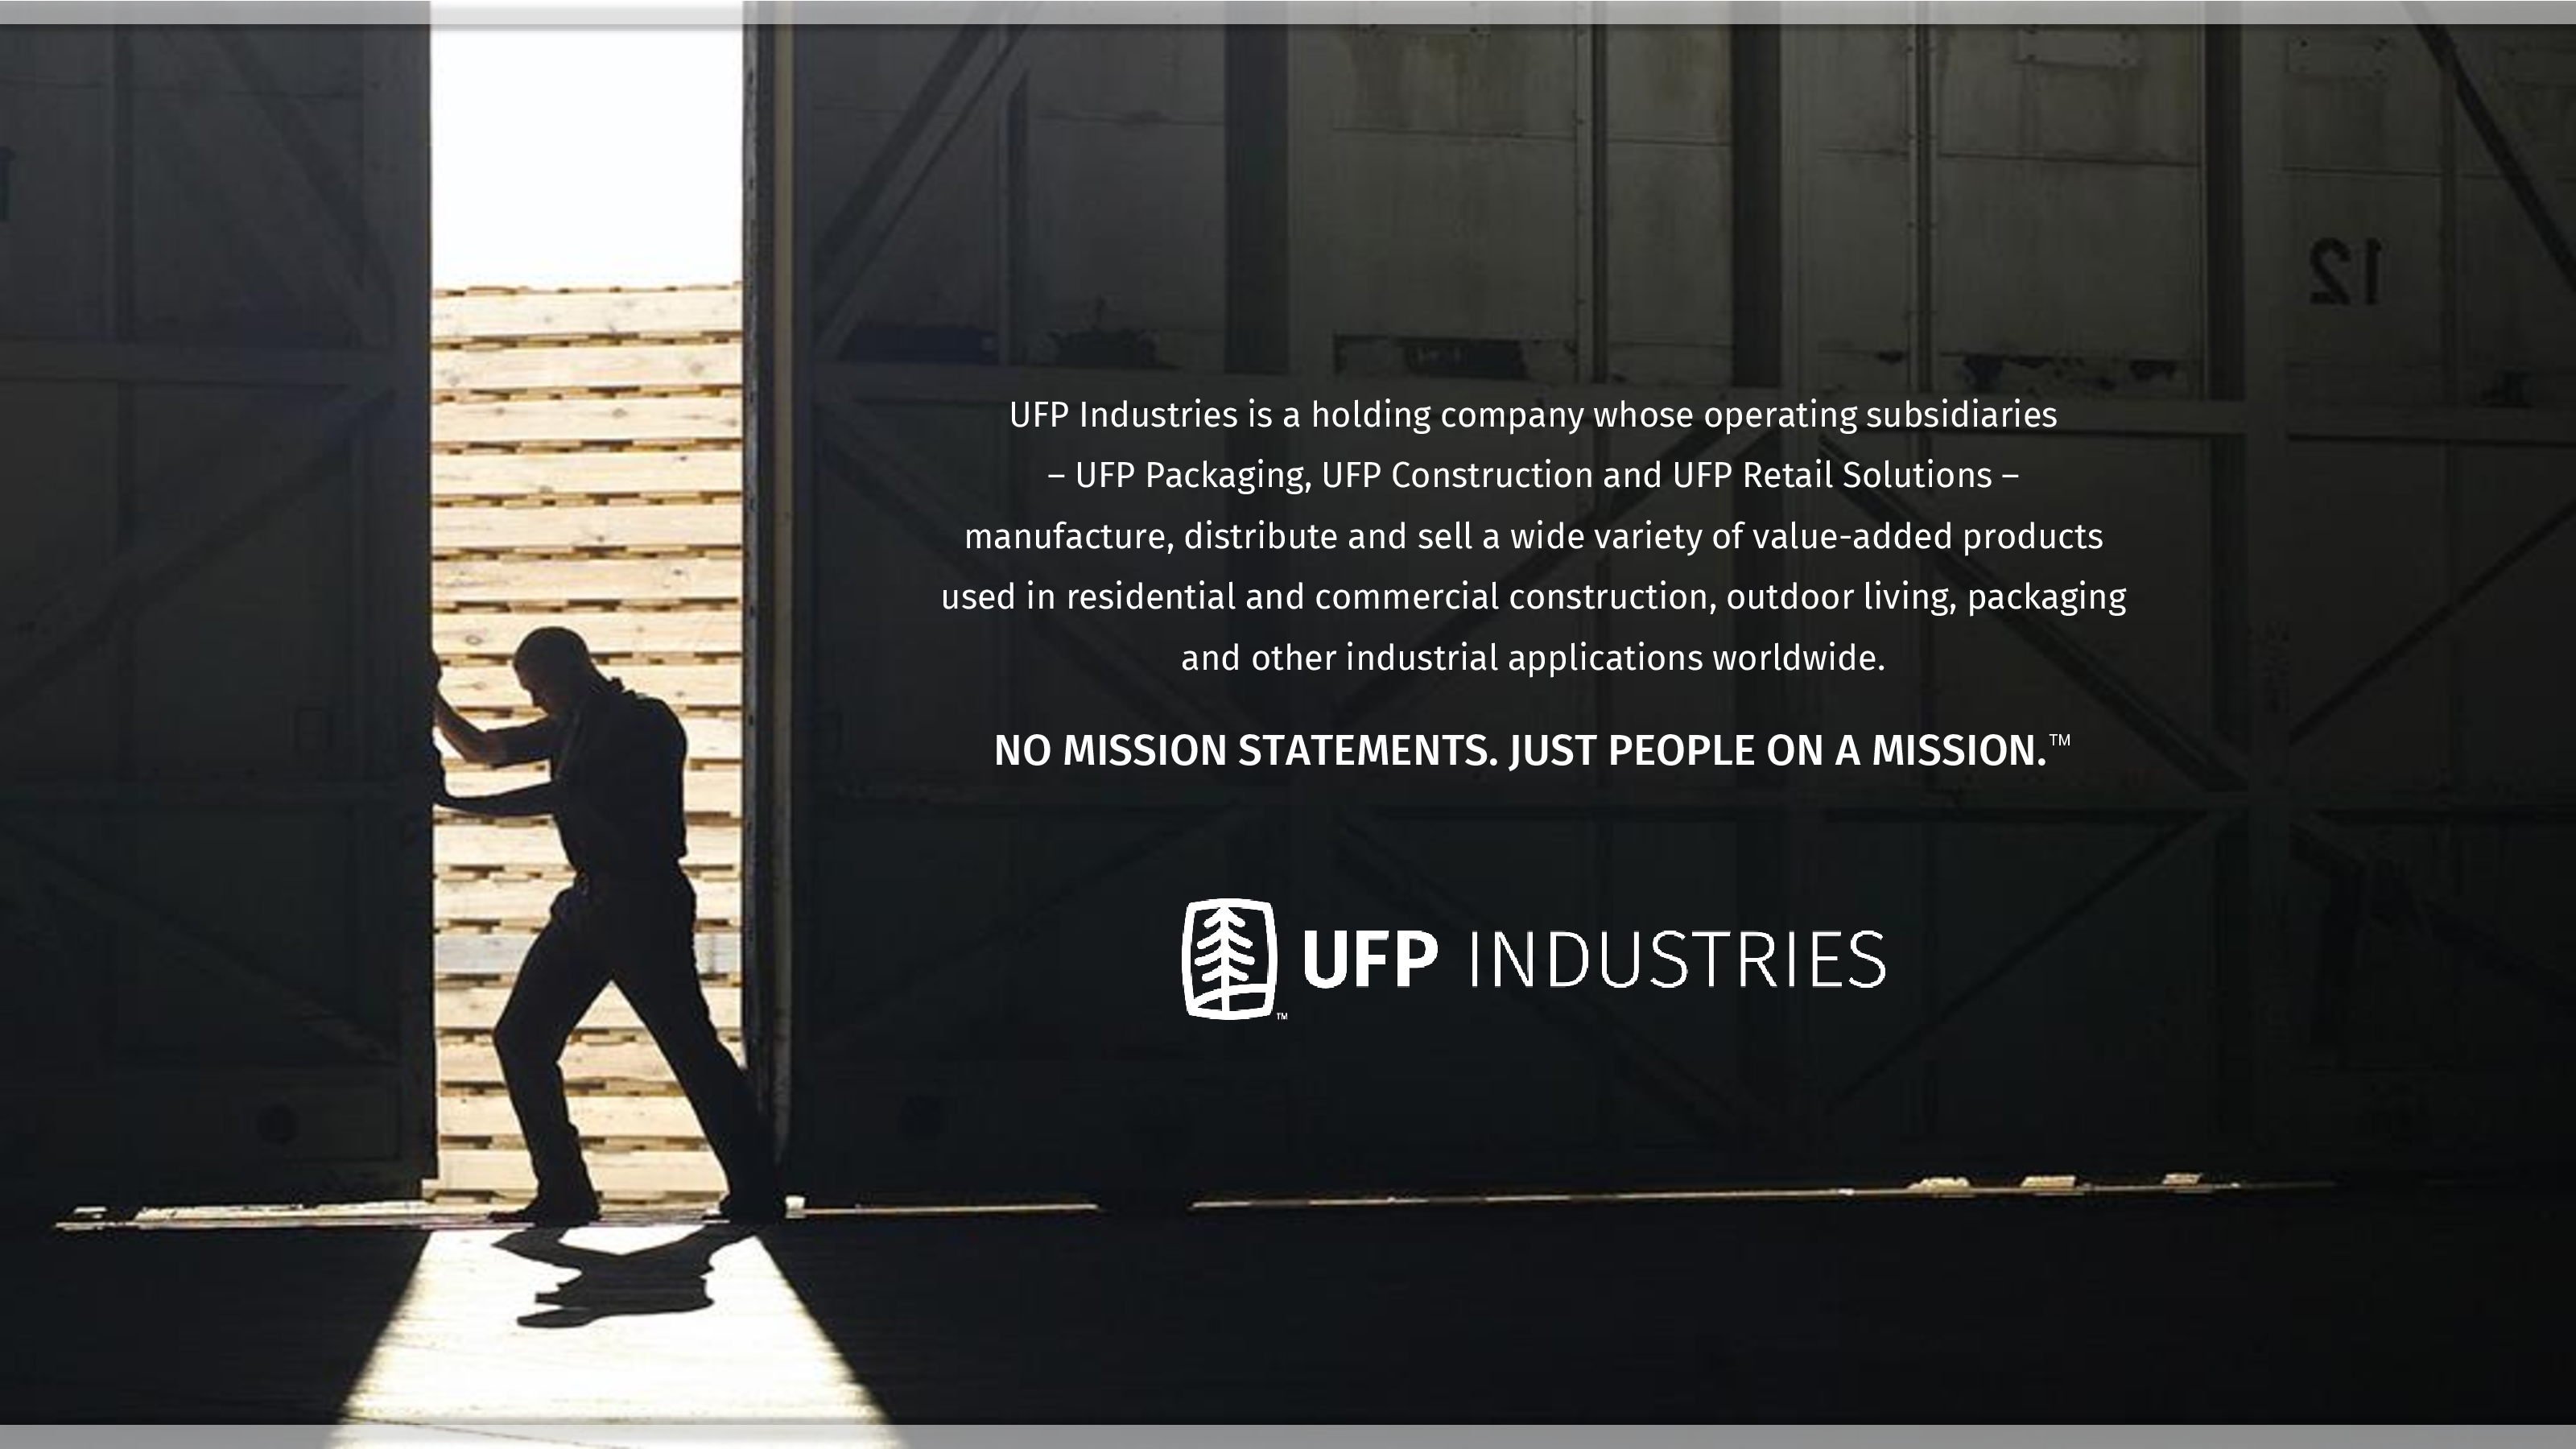 UFP Industries is a 